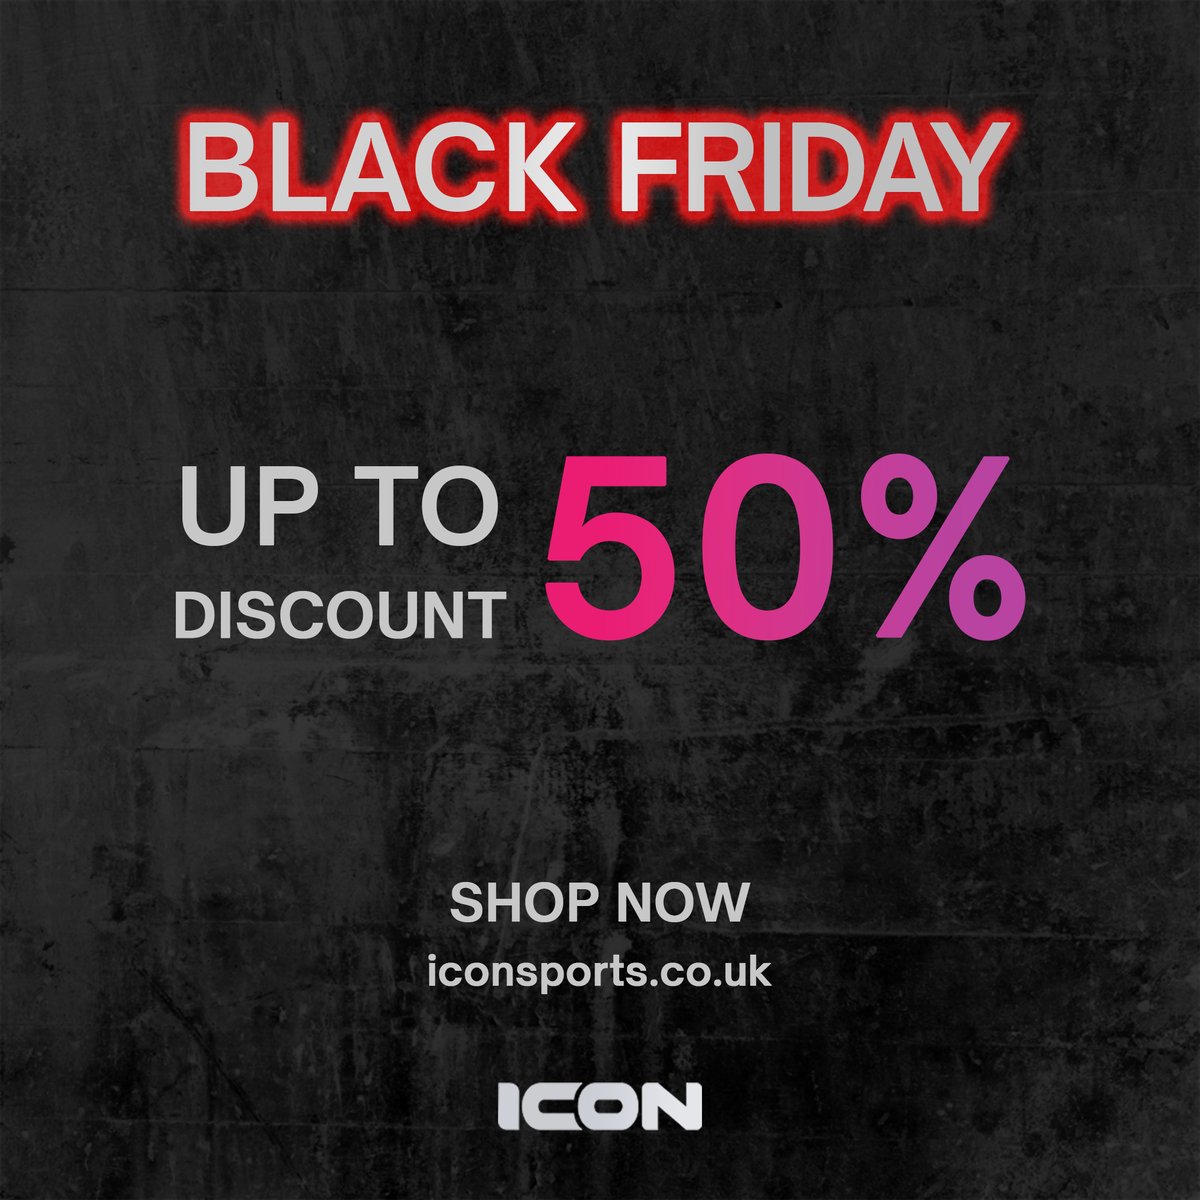 Got anything ready in the basket? Get your teamwear and equipment with our #BlackFriday up to 50% discount offers. Shop now at: ow.ly/5c4G50Q8TfC #iconsports #iconsportsuk #teamwear #strengthinunity